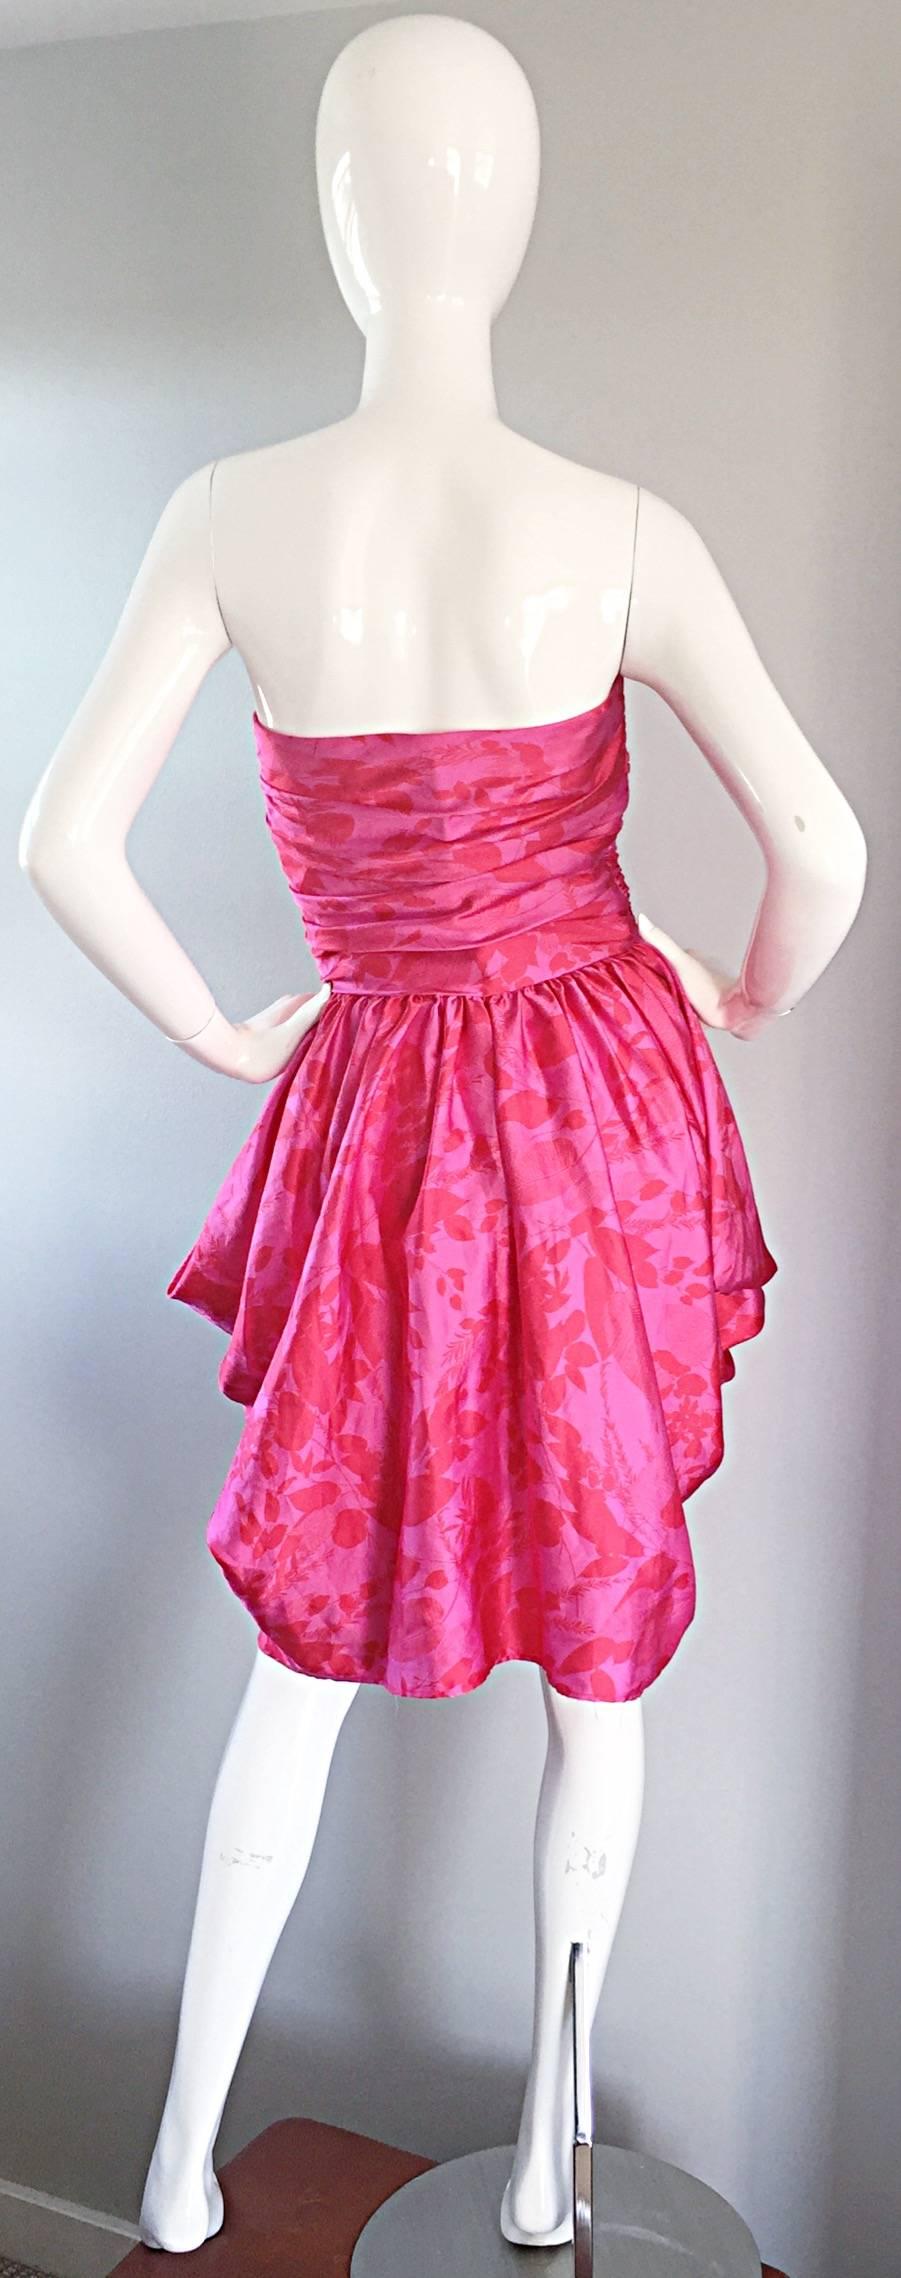 Incredible vintage VICTOR COSTA hot pink / fuchsia and red strapless dress! 